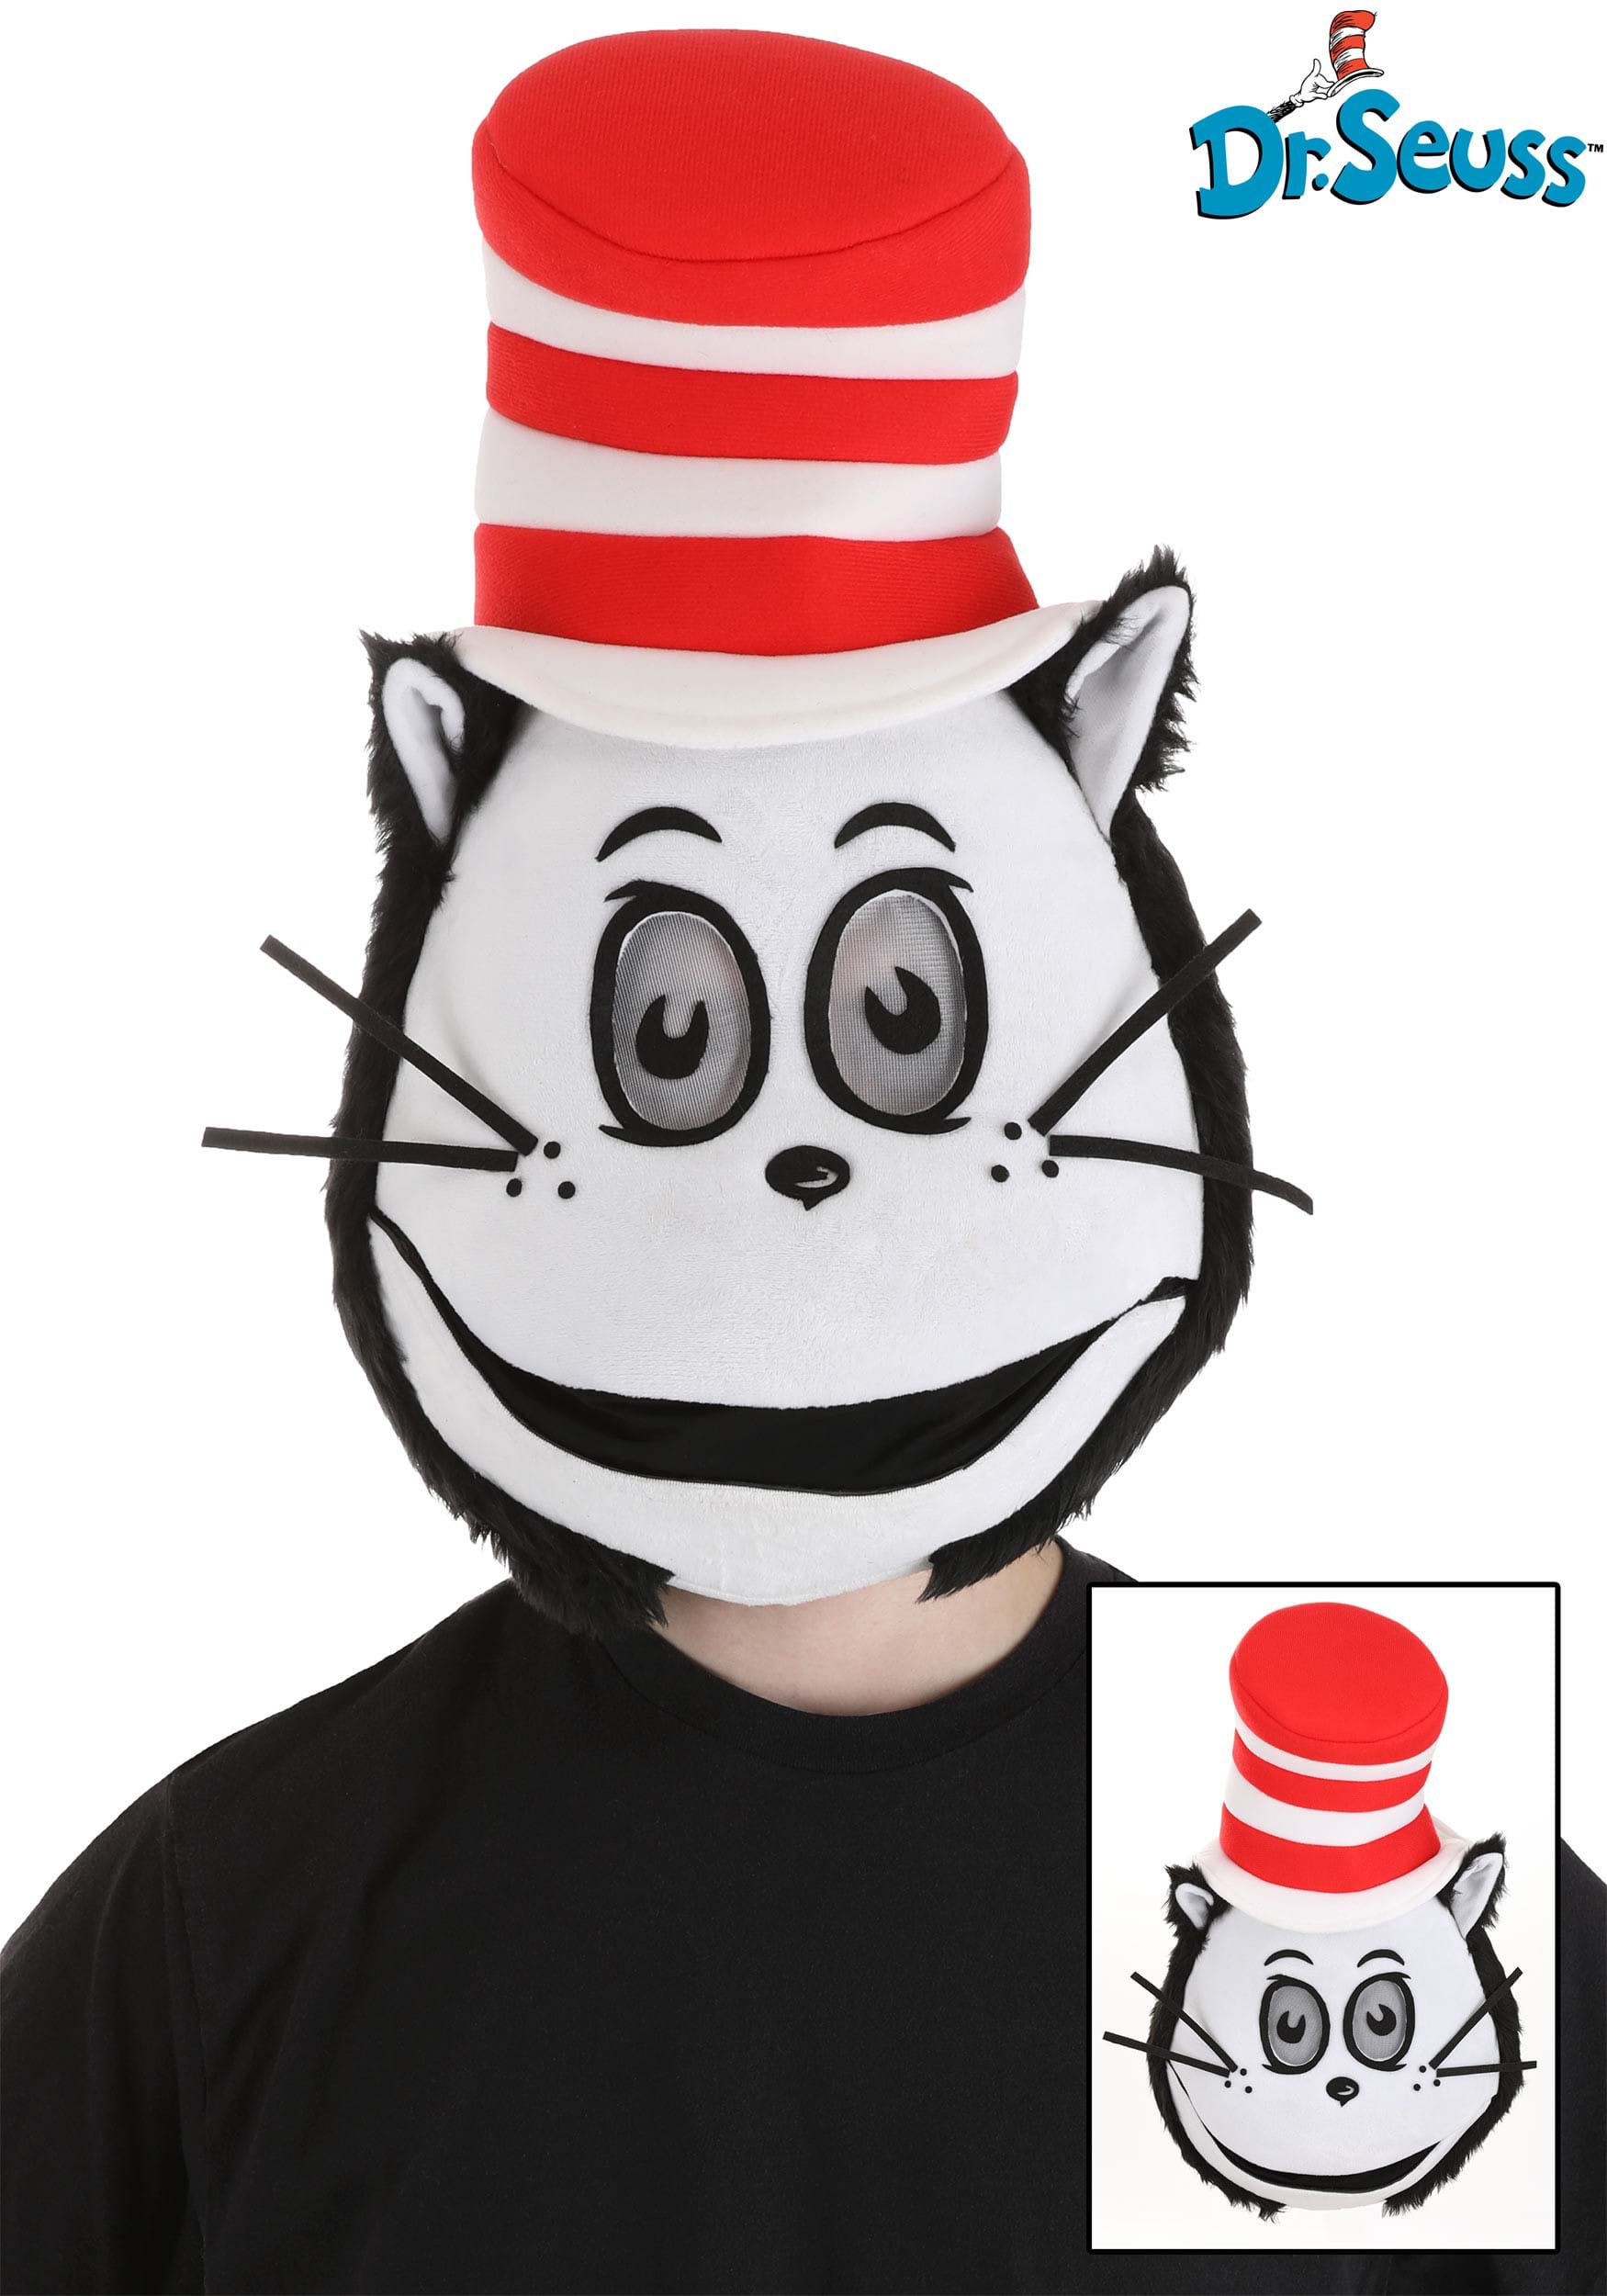 https://images.halloweencostumes.ca/products/80804/1-1/the-cat-in-the-hat-mouth-mover-mask.jpg